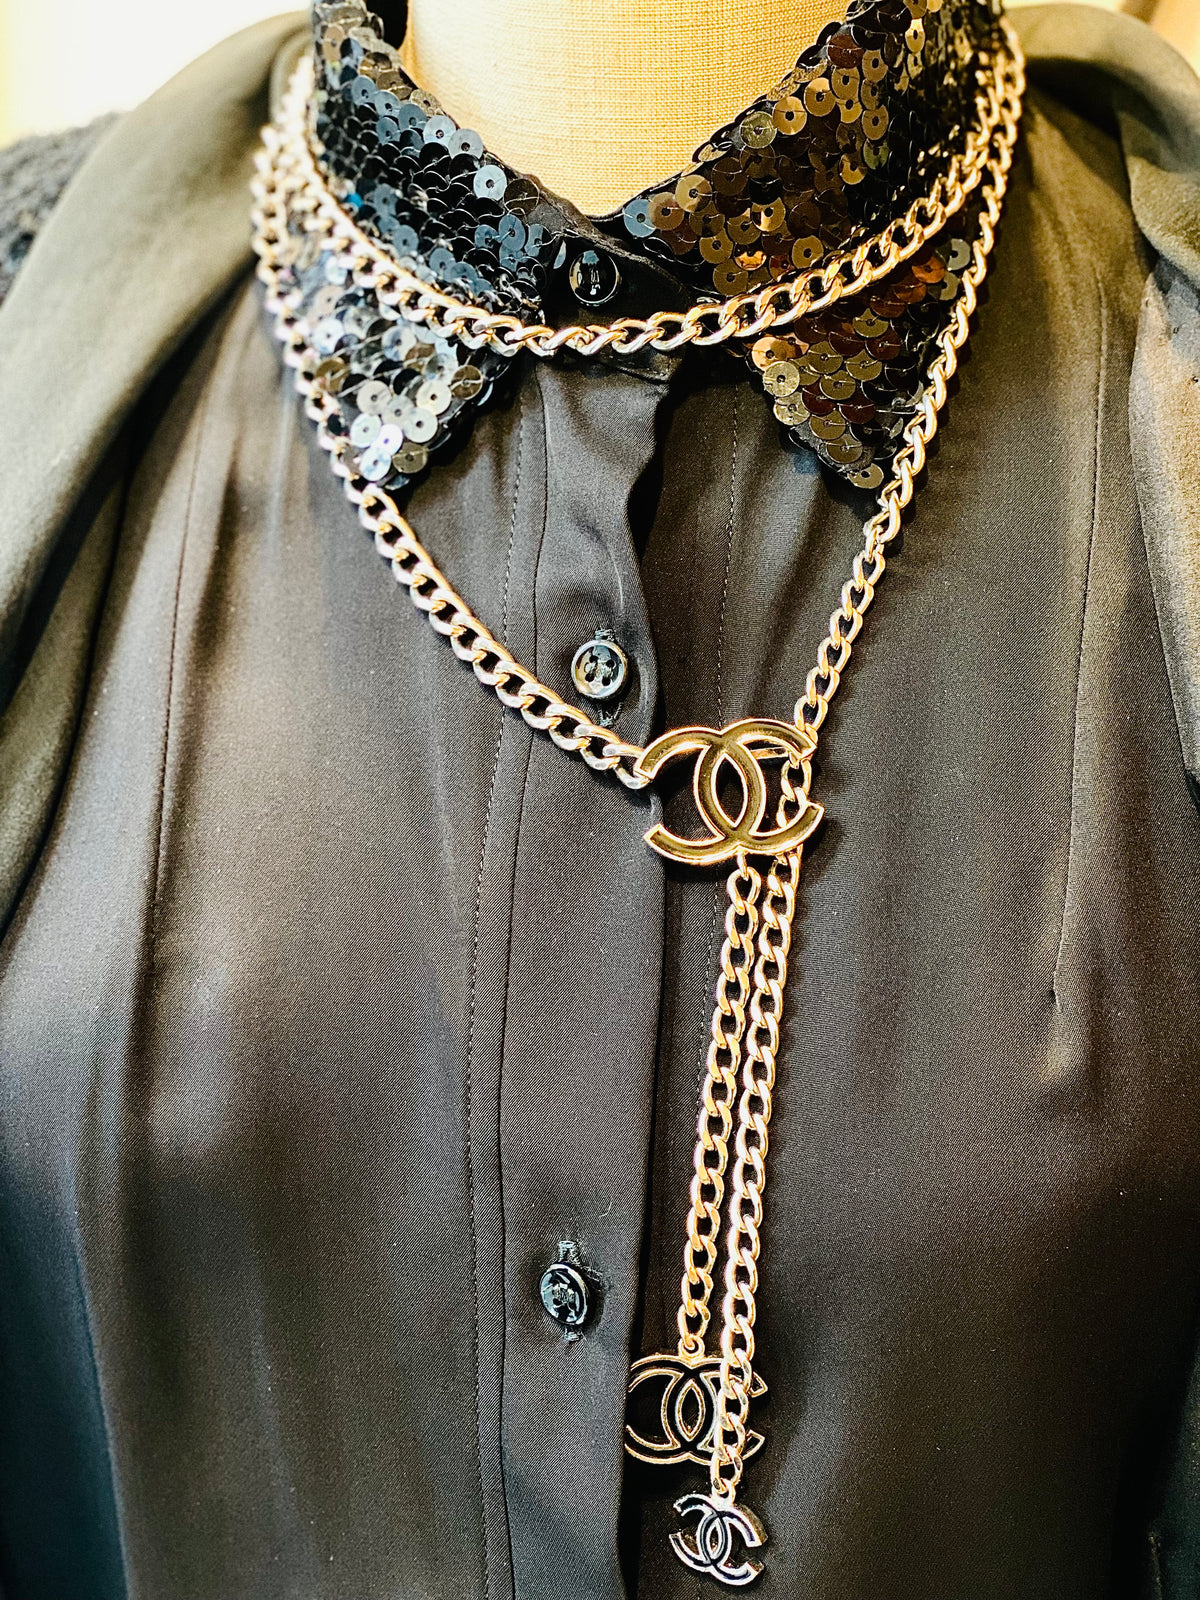 CHANEL | Silver Tone CC Metal Chain Belt / Necklace